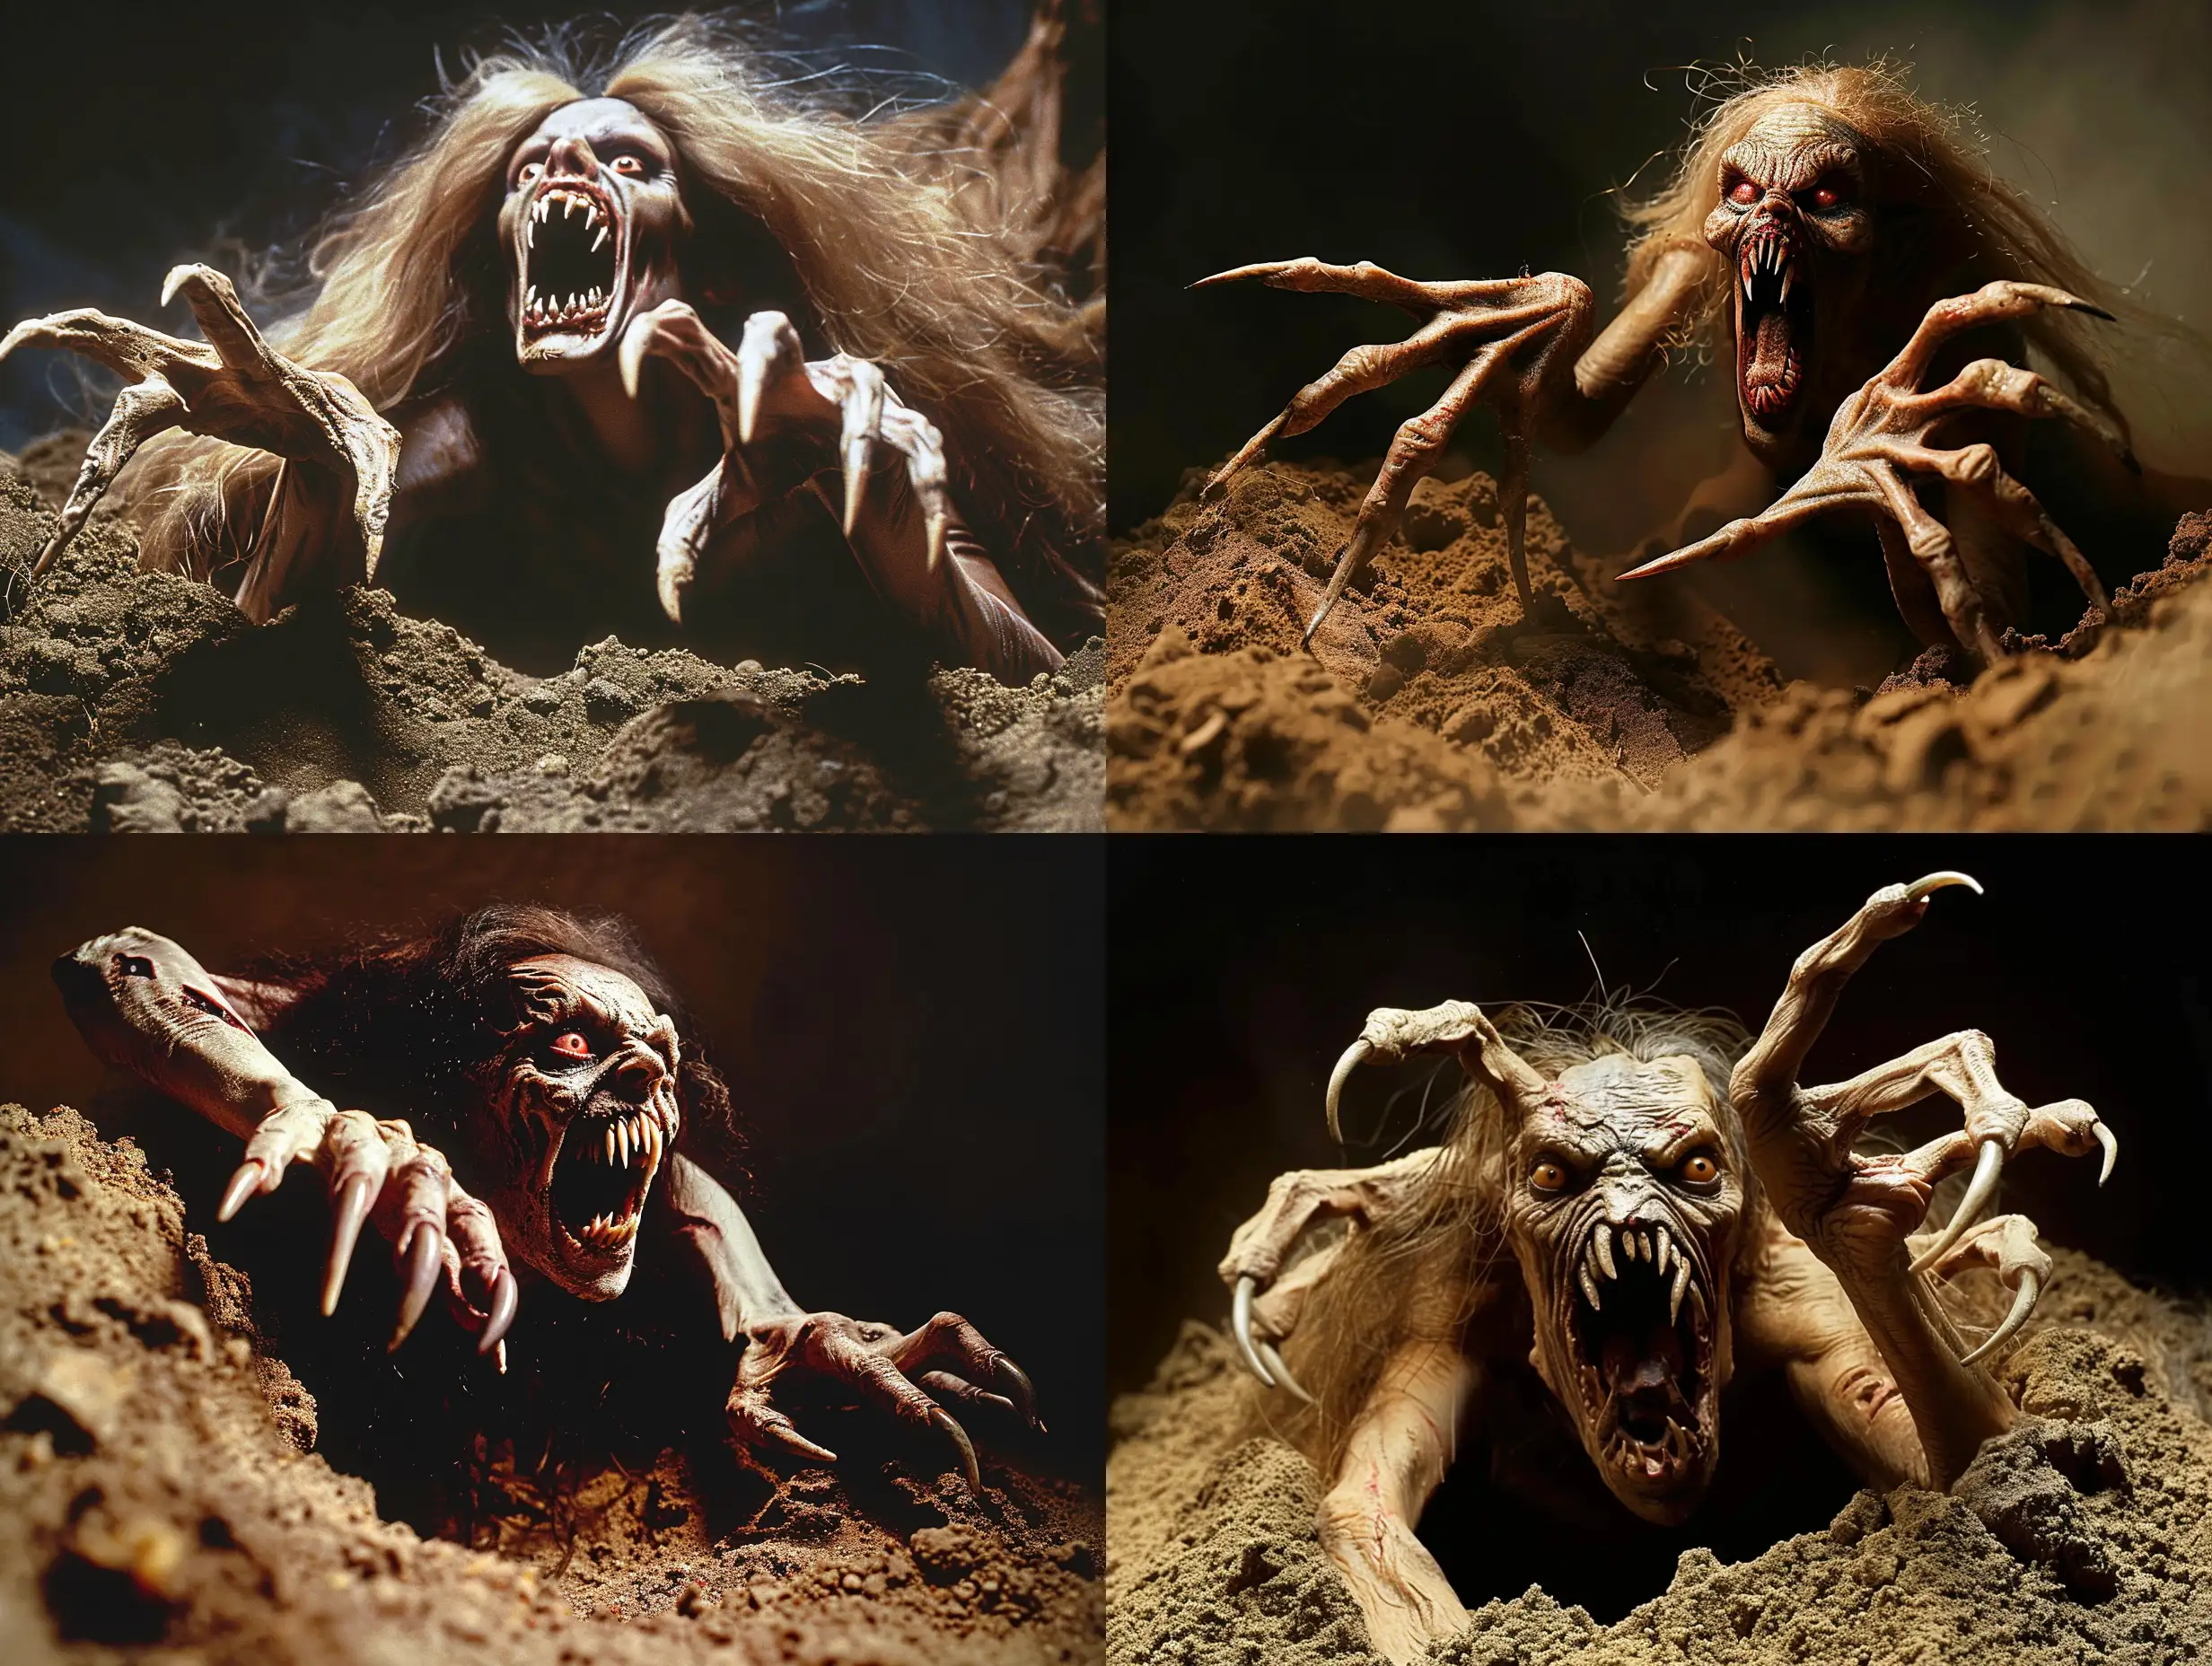 A wild, ugly monstrous vampire woman who has climbed out of the grave, her long, pale fingers clawing at the dirt as if she's been buried for centuries. Her extraordinarily long, pointed fingernails, resembling the claws of a predator, protrude from each of her five fingers on each hand. The vampire's mouth is wide open, revealing a row of terrible teeth that look like fangs, as if she's ready to sink them into her prey. Her face is twisted in a threatening expression, her eyes glowing with an unearthly light that pierces the darkness around her.